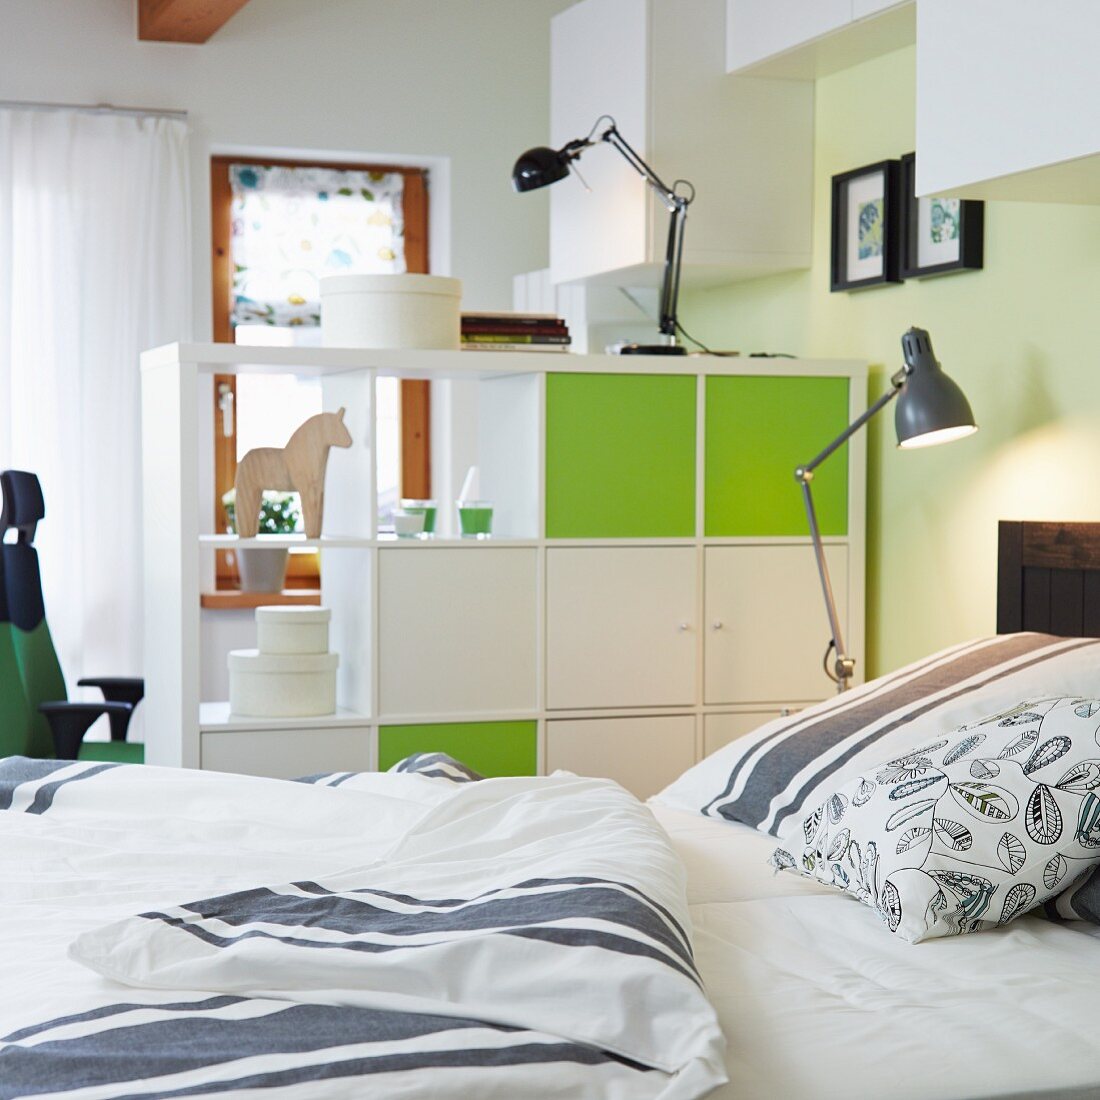 A view from a bed of a room divider with closed elements in white and friendly green with retro-style lamps and bed clothes